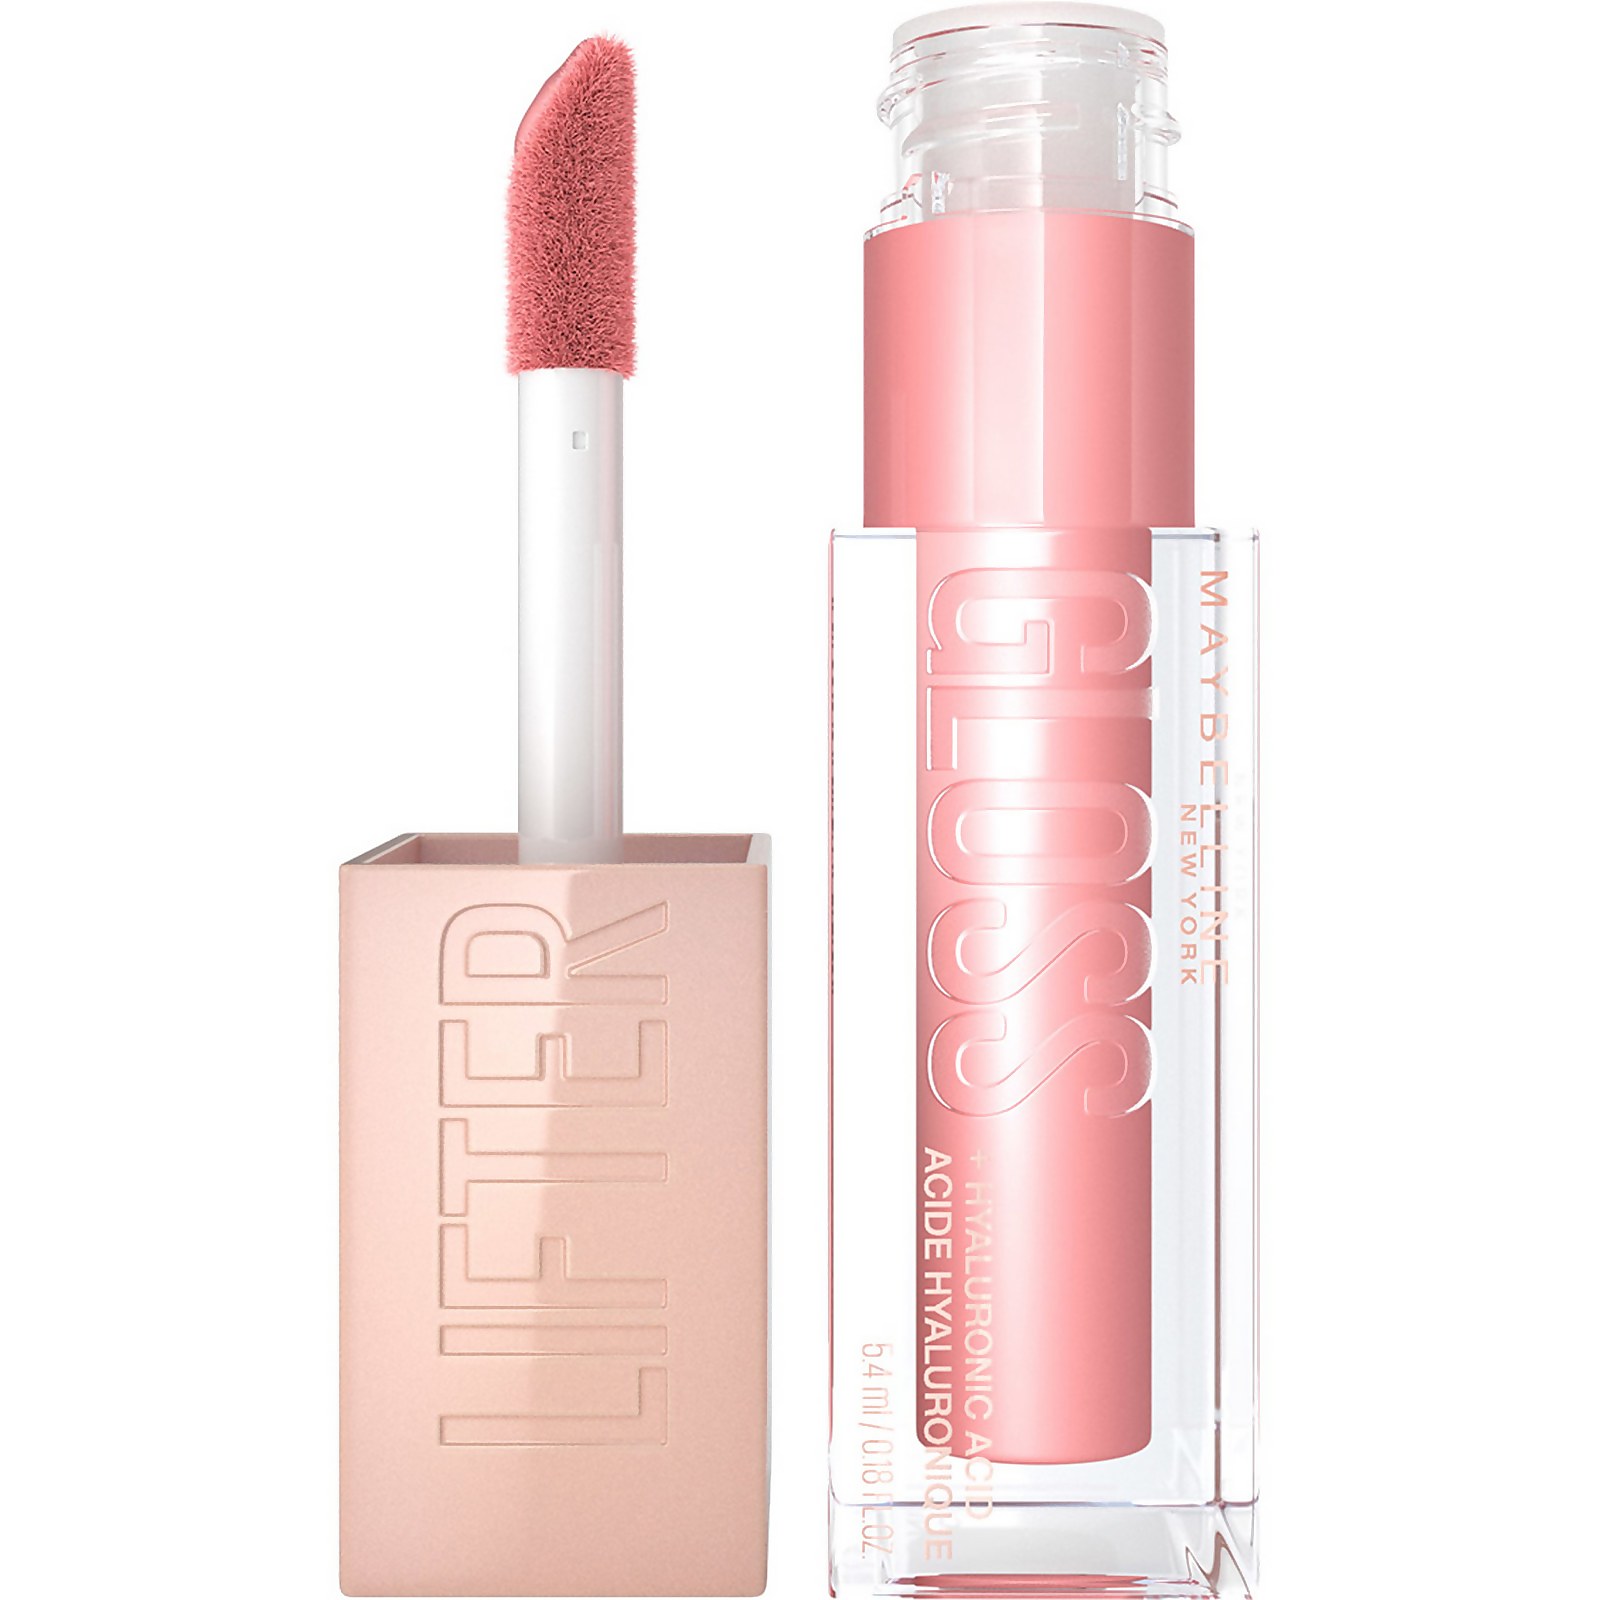 Maybelline Lifter Gloss Hydrating Lip Gloss with Hyaluronic Acid 5g (Various Shades) - 006 Reef